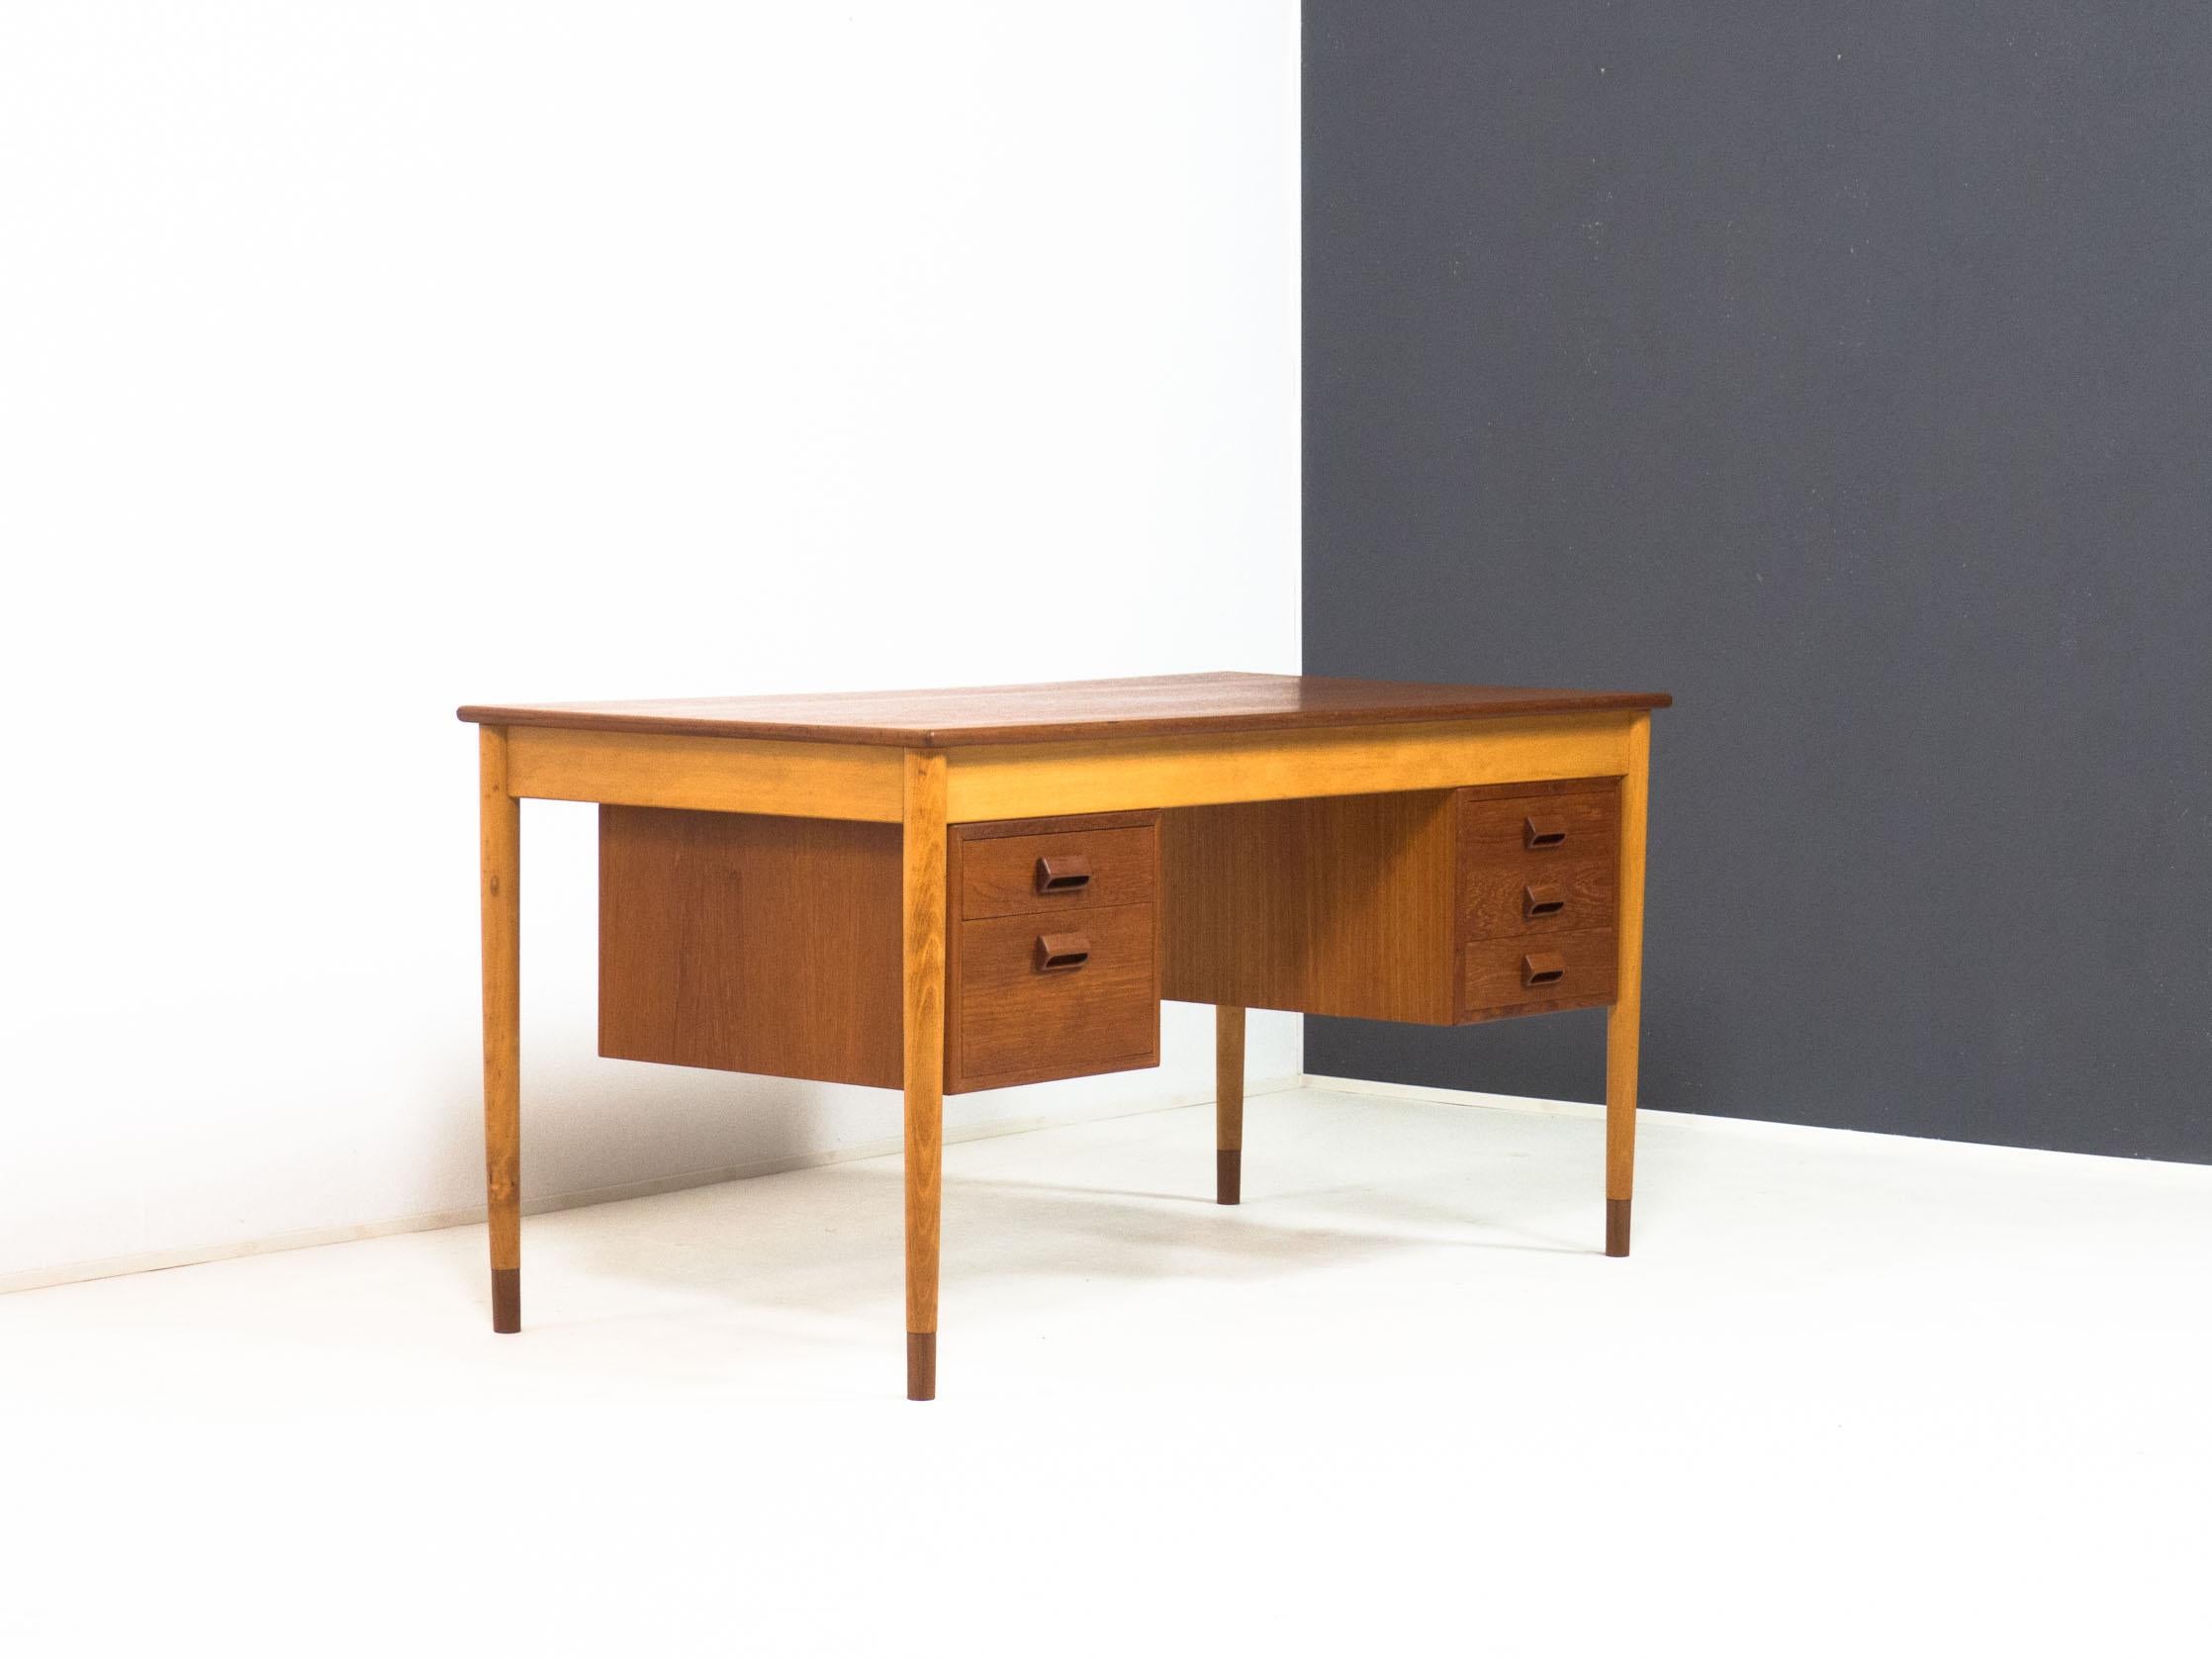 Free standing writing desk with model no. 130 designed by Børge Mogensen for Søborg Møbler of Denmark in the 1950s.

This desk is made from a teak veneered top, with solid teak edges. The drawer boxes and drawers are veneered in teak and have solid